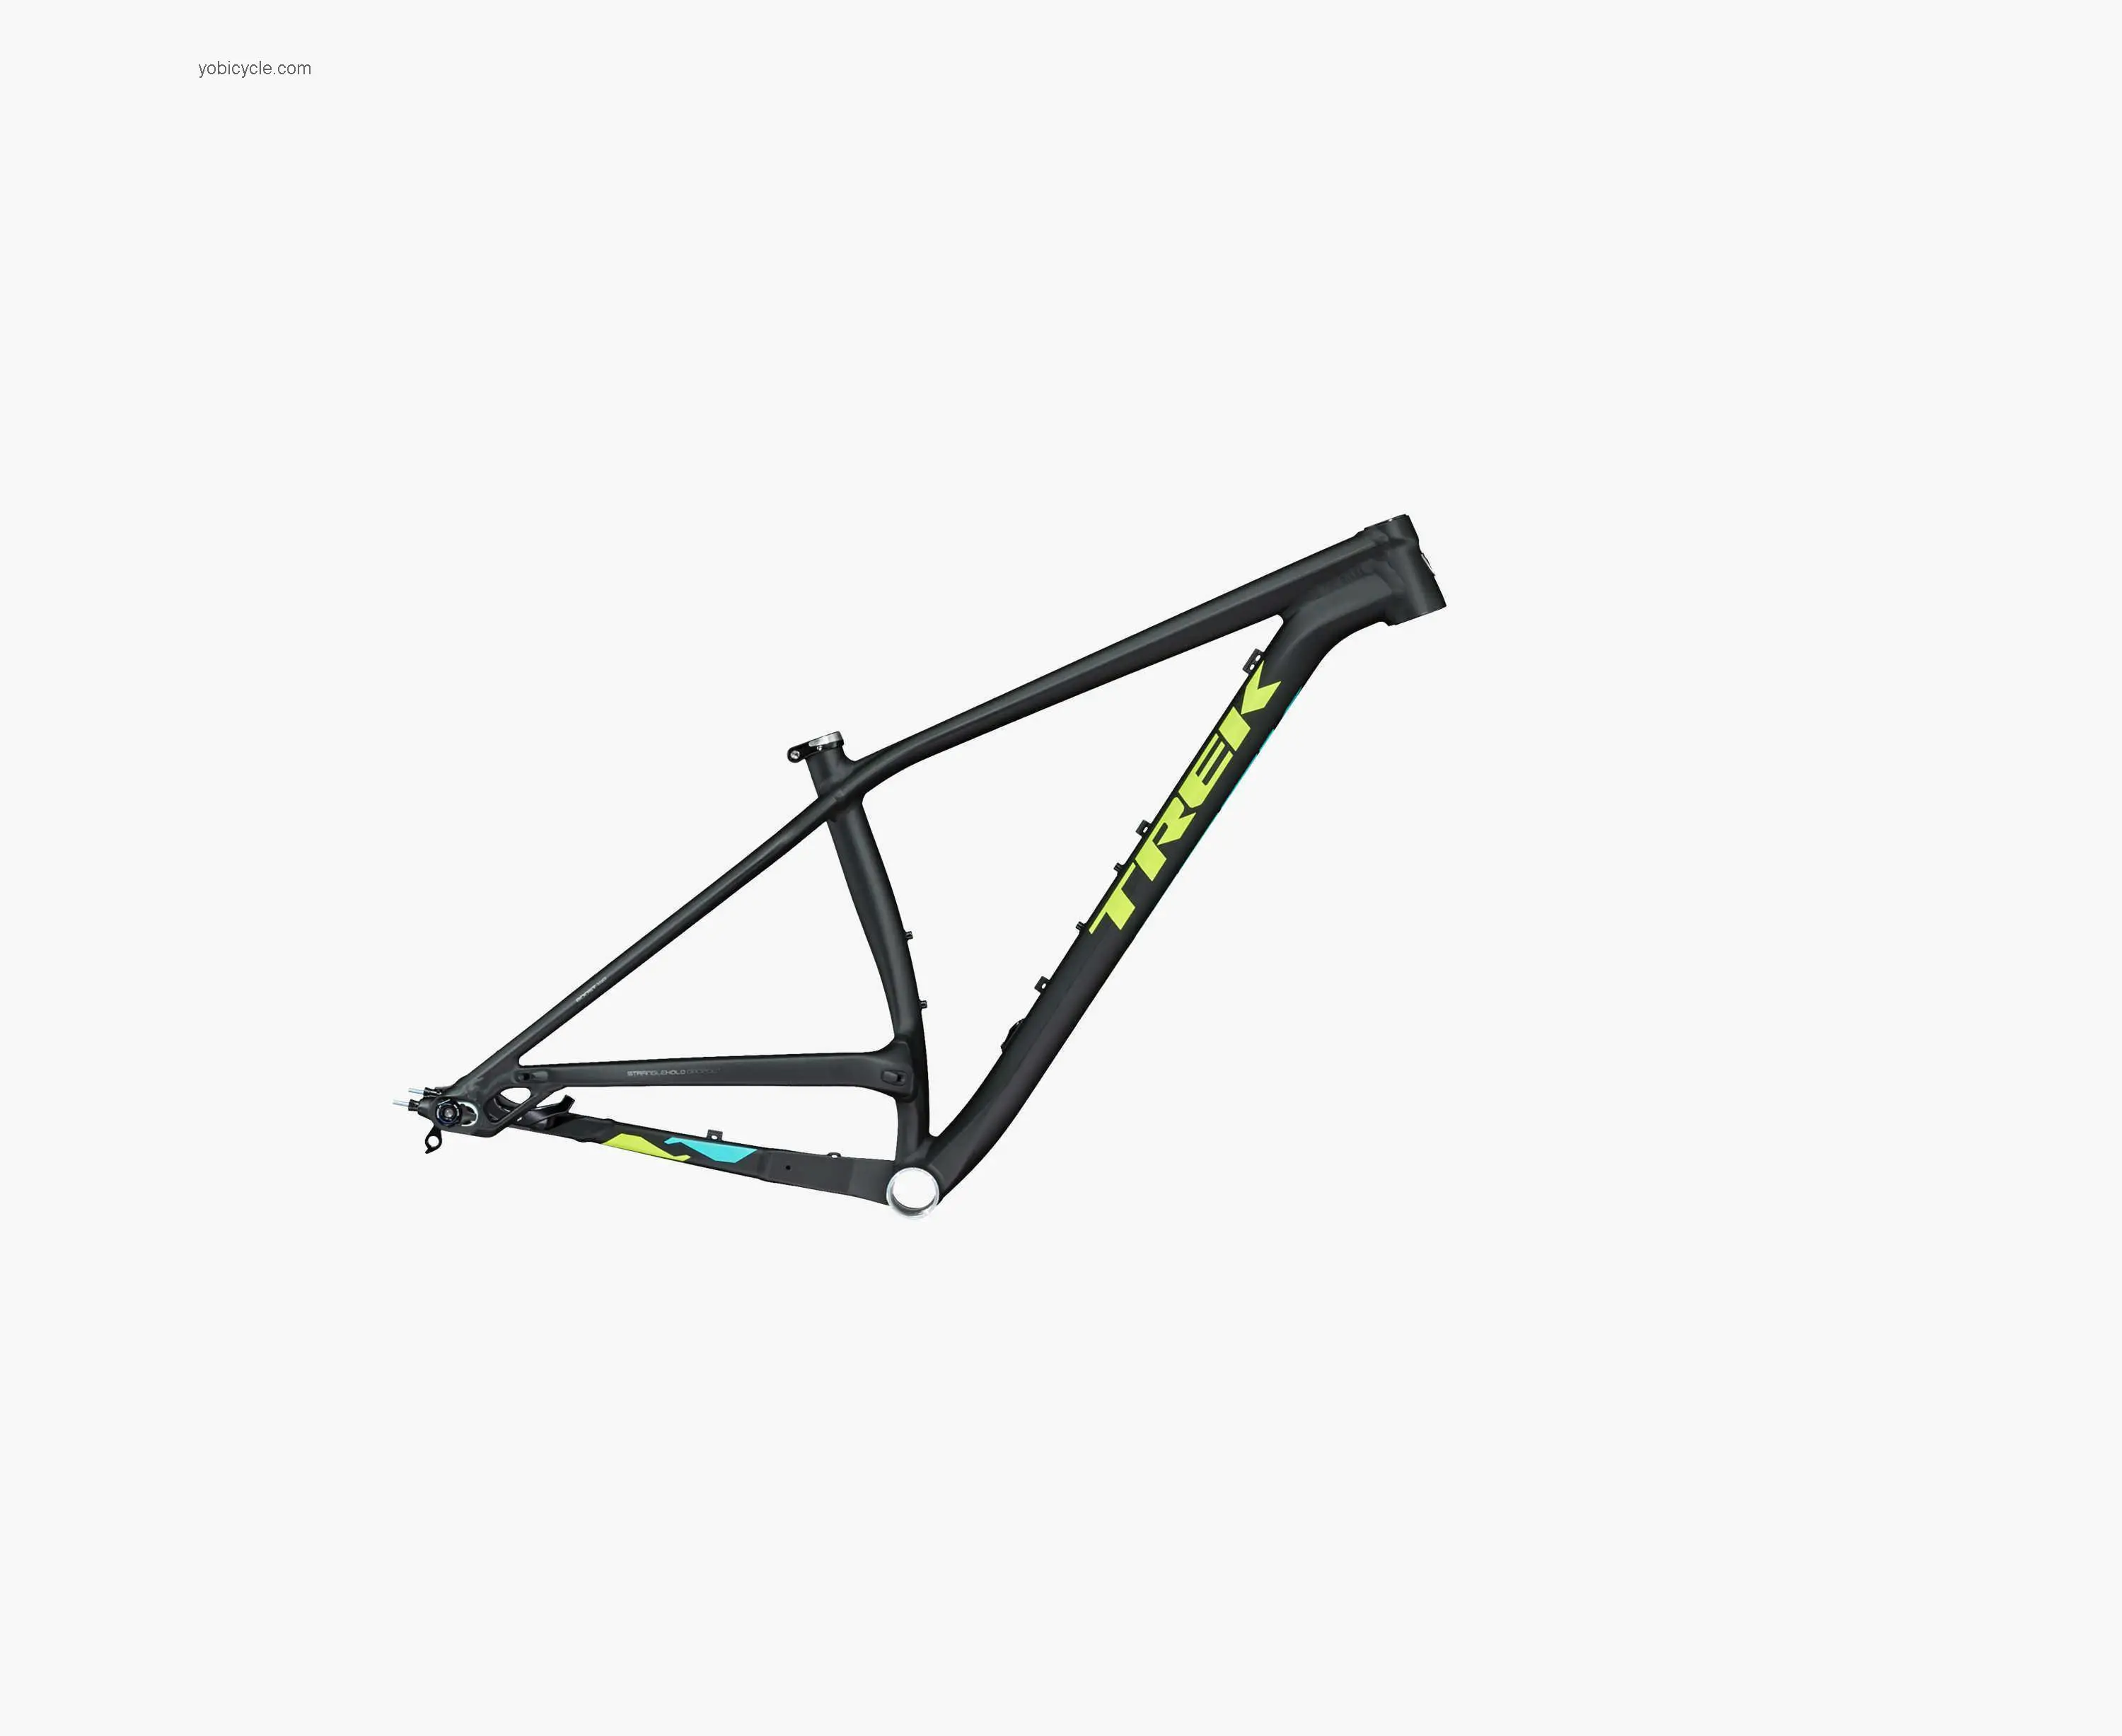 Trek Stache 29+ Frameset competitors and comparison tool online specs and performance